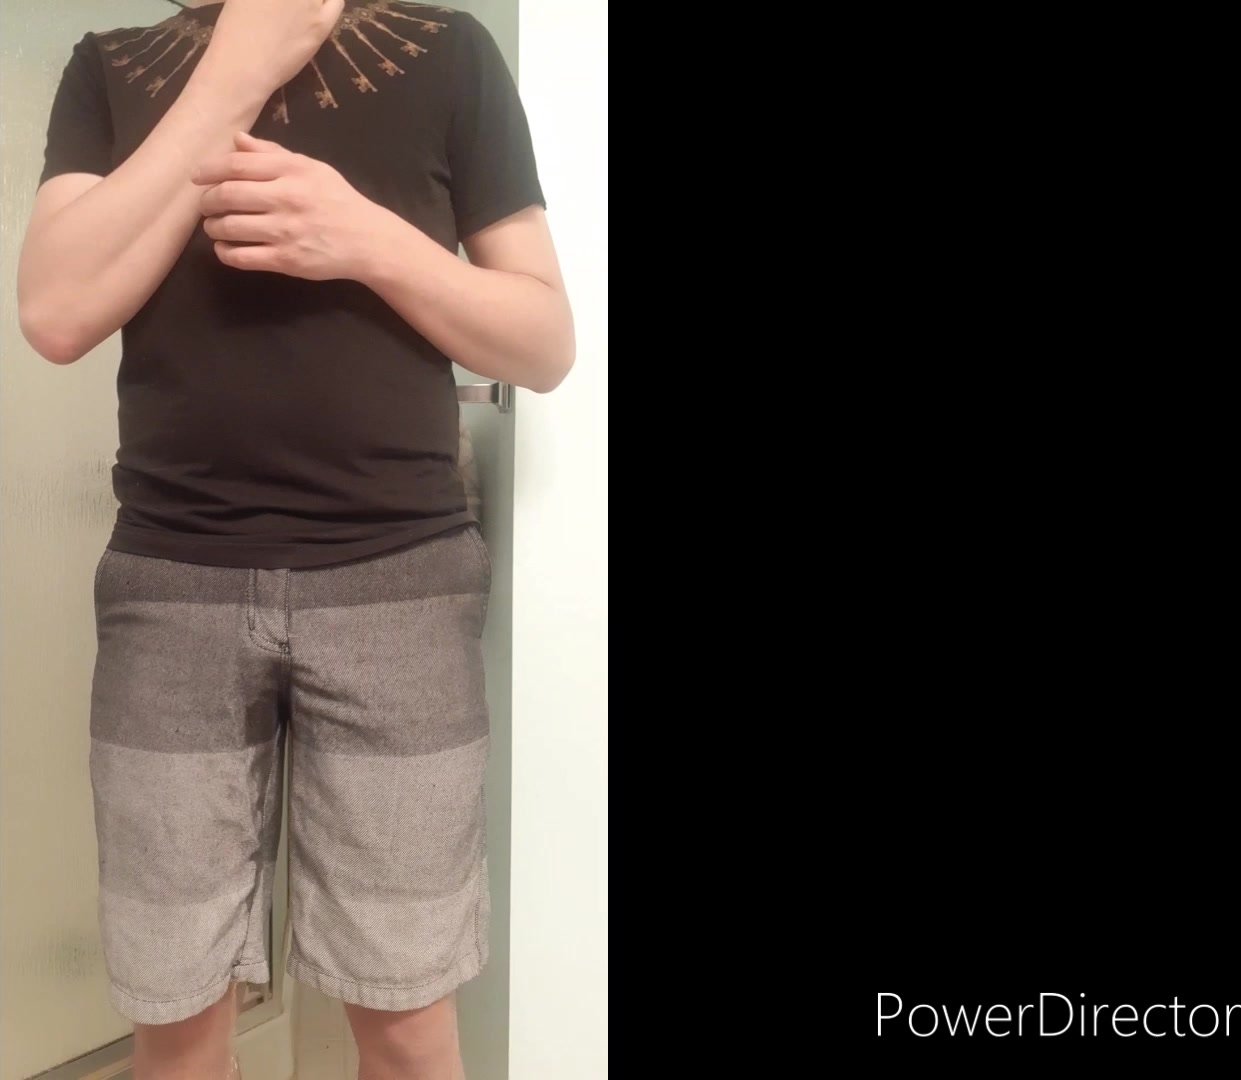 Pissing my shorts - video 5